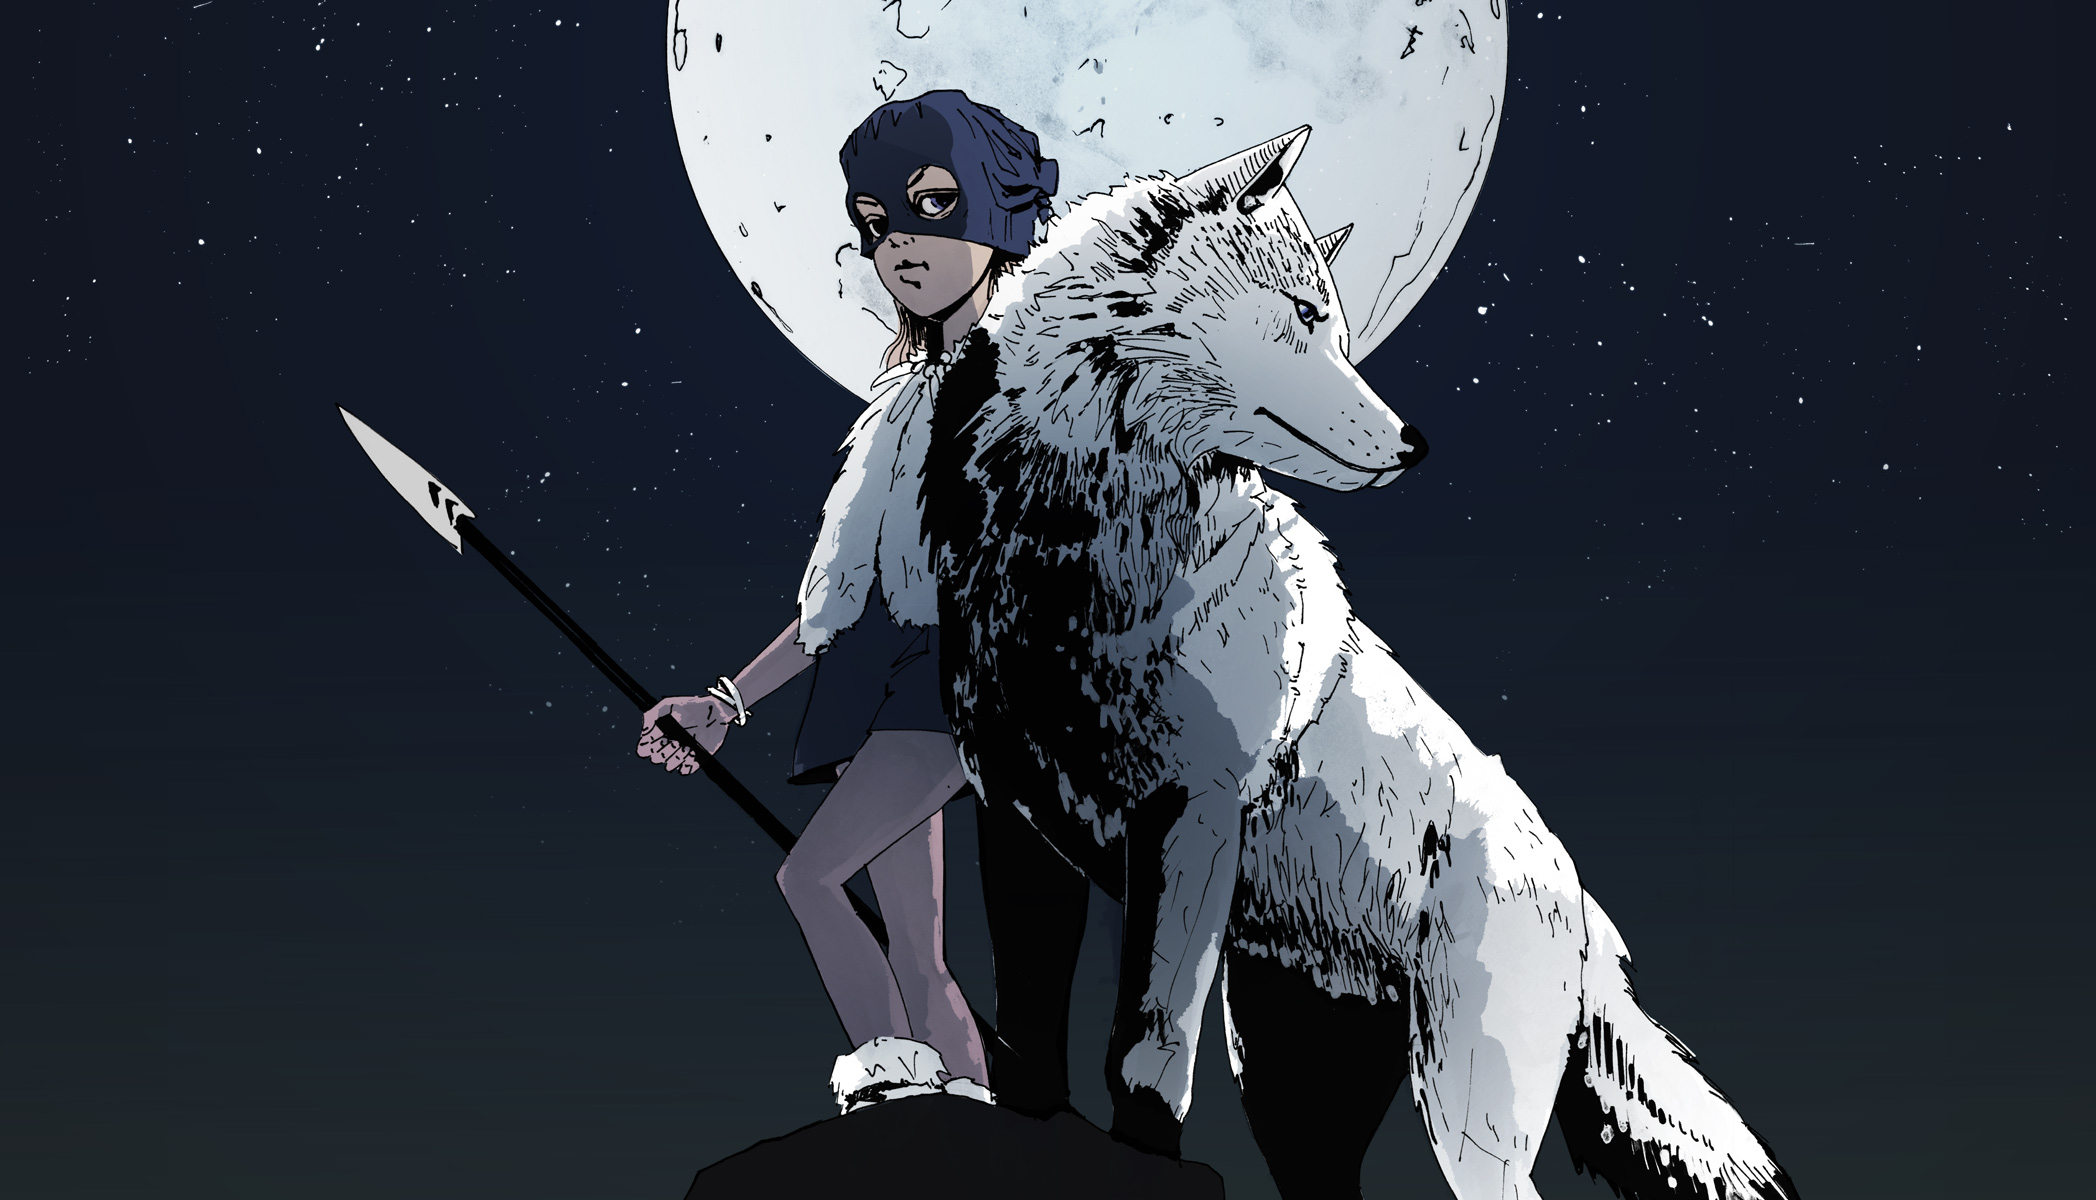 Agnes standing holding a spear with white wolf. Clear night sky with large moon